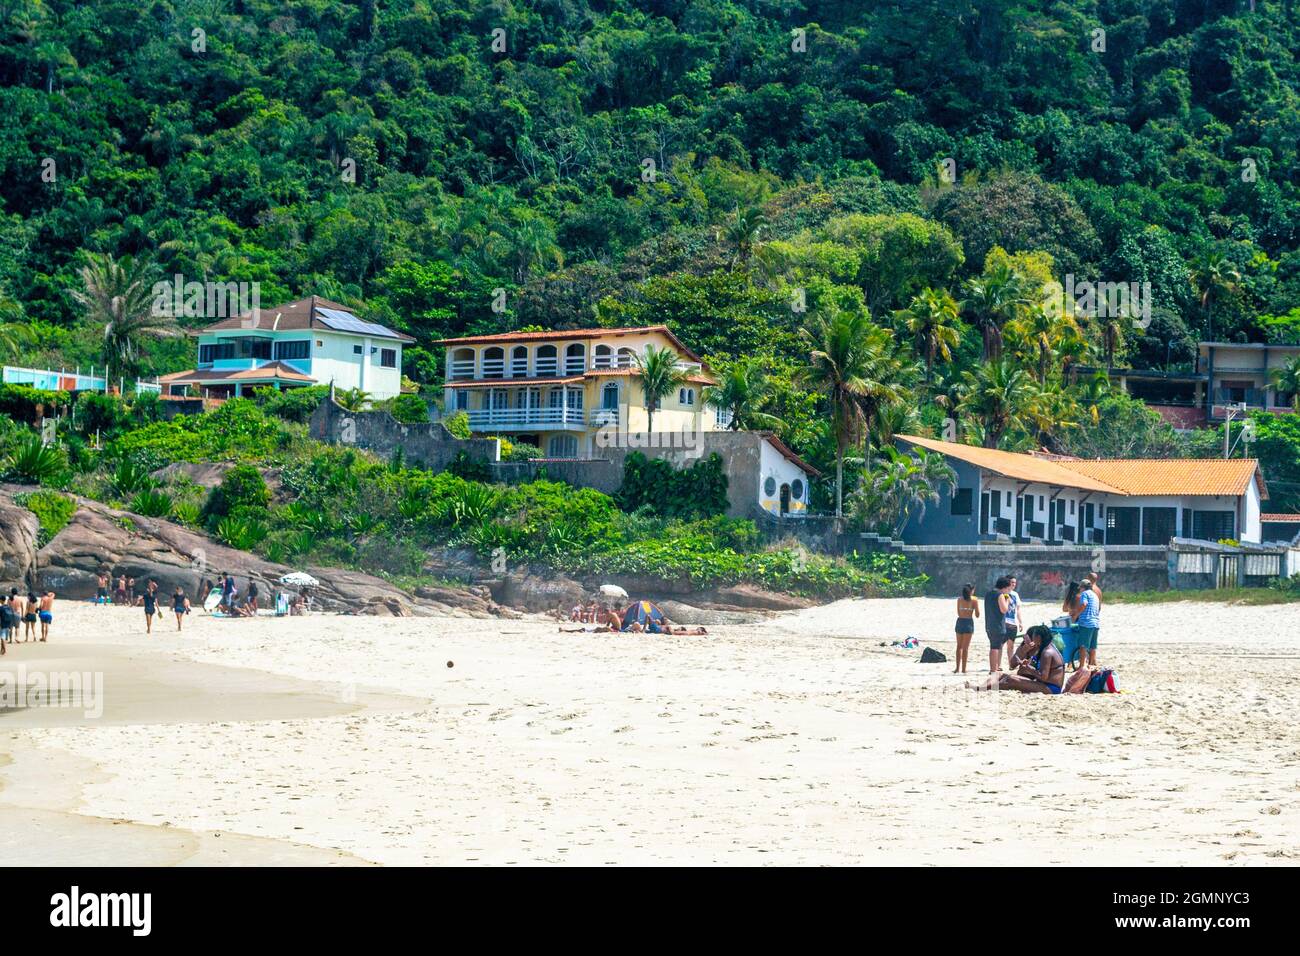 Buildings in the mountainside in the Piratininga beach in Rio de Janeiro, Brazil. With a beautiful landscape, this famous place is a major tourist att Stock Photo